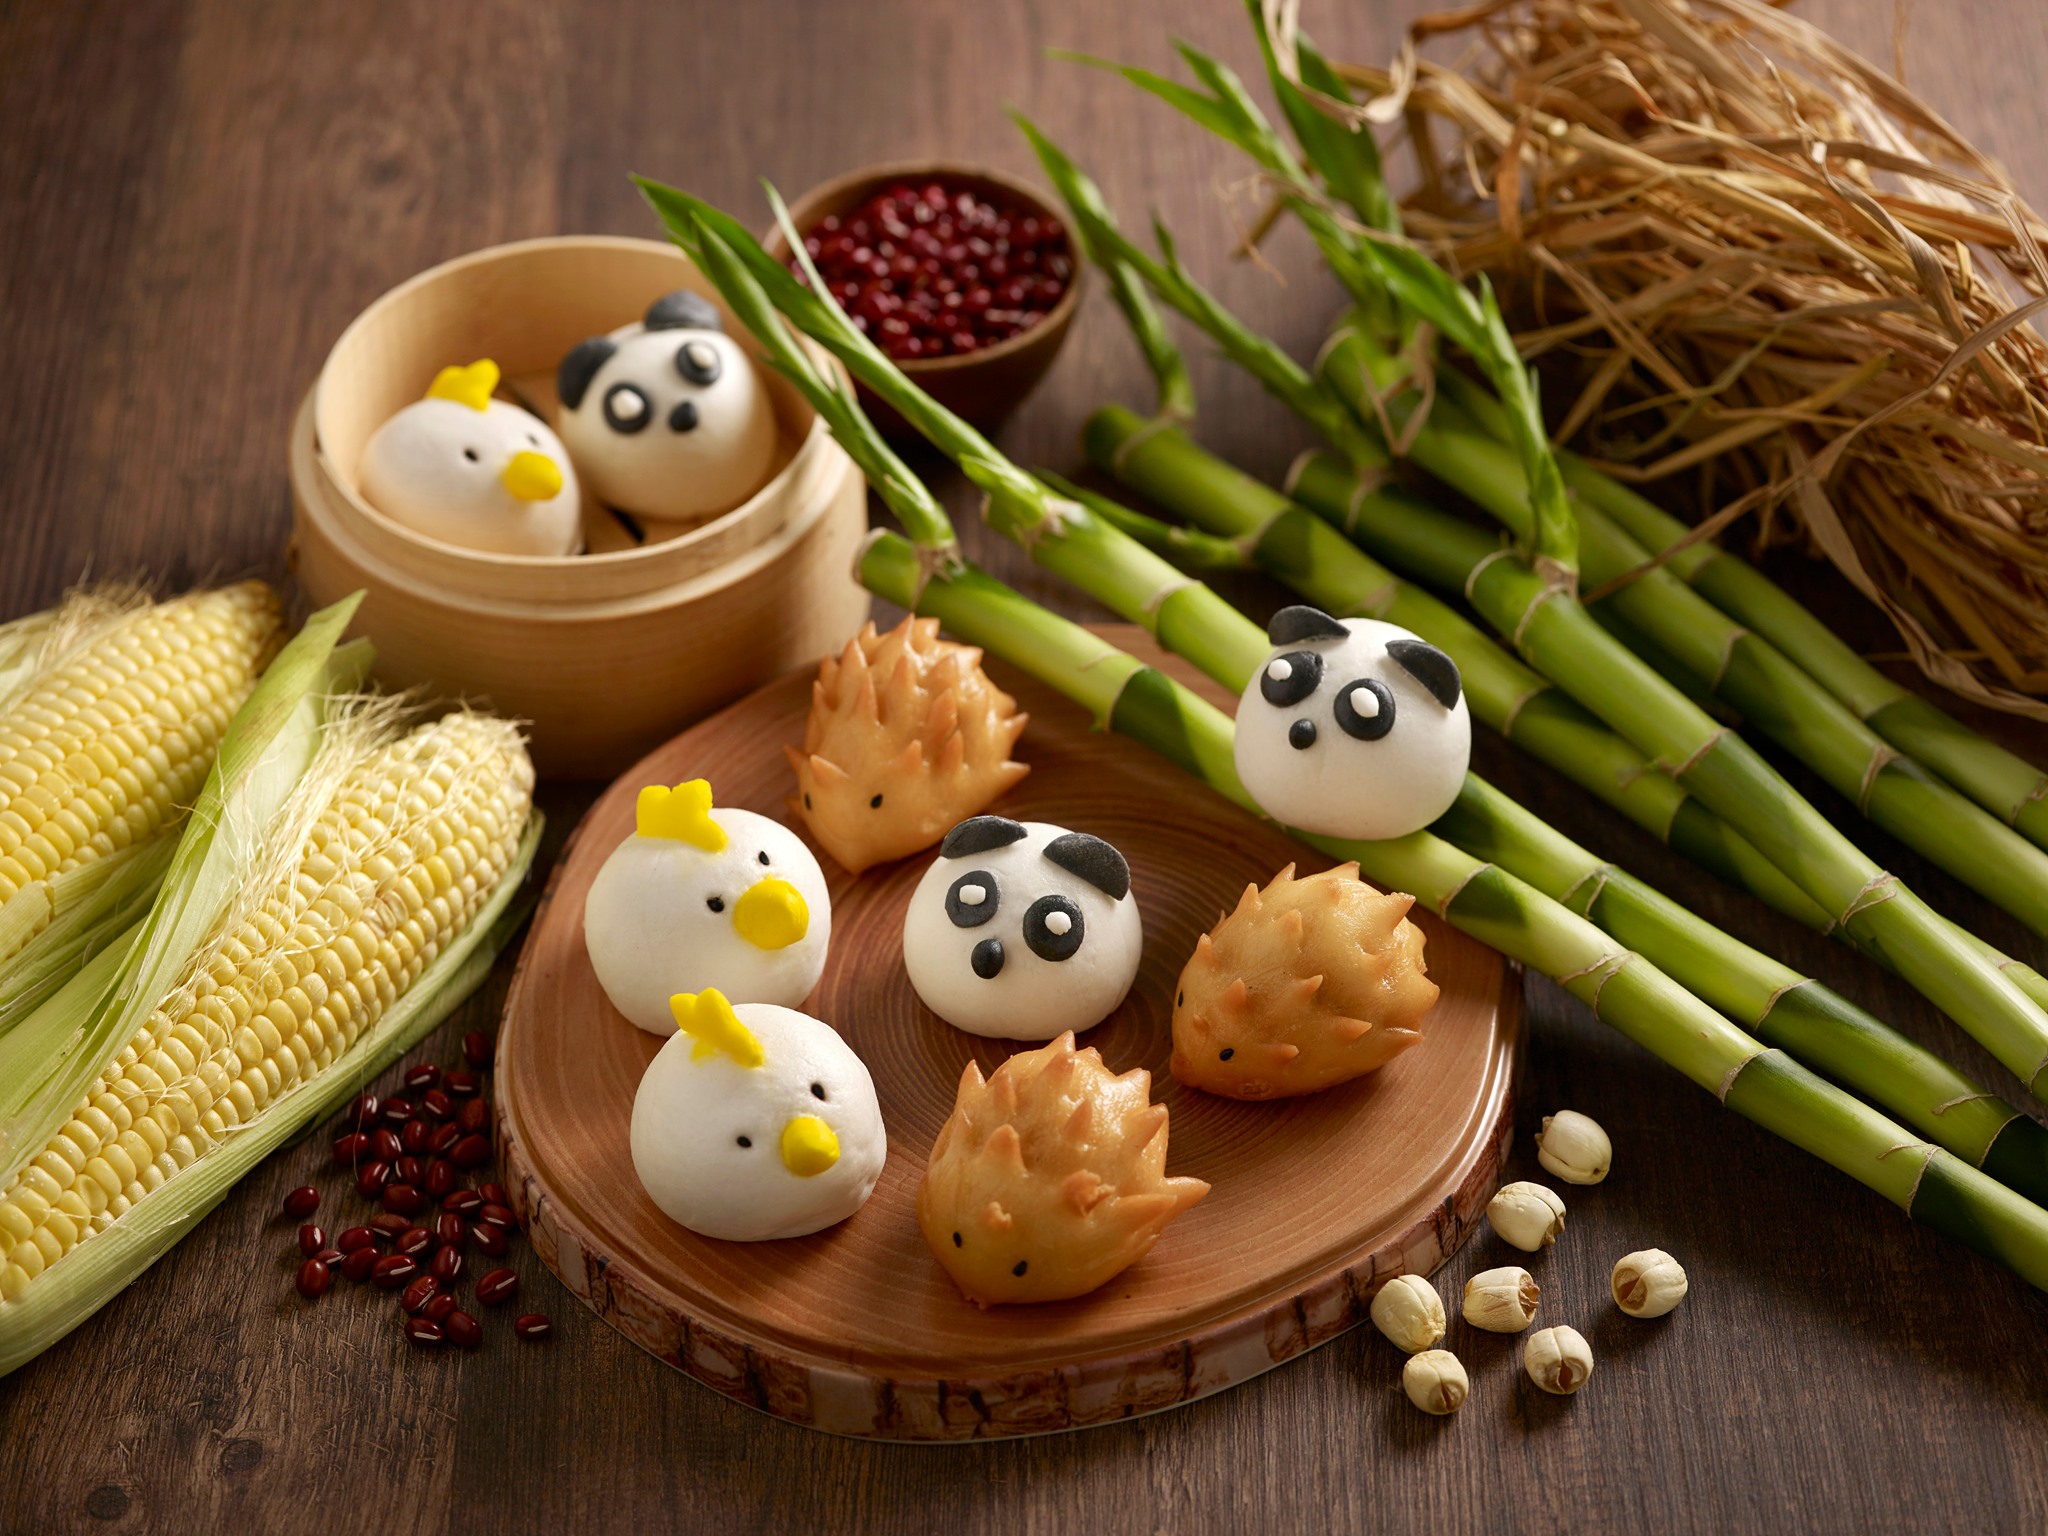 $19.90++ All-You-Can-Eat Dim Sum Buffet Promo at Soup Restaurant Changi Airport from 11 – 30 Nov 20 - 2